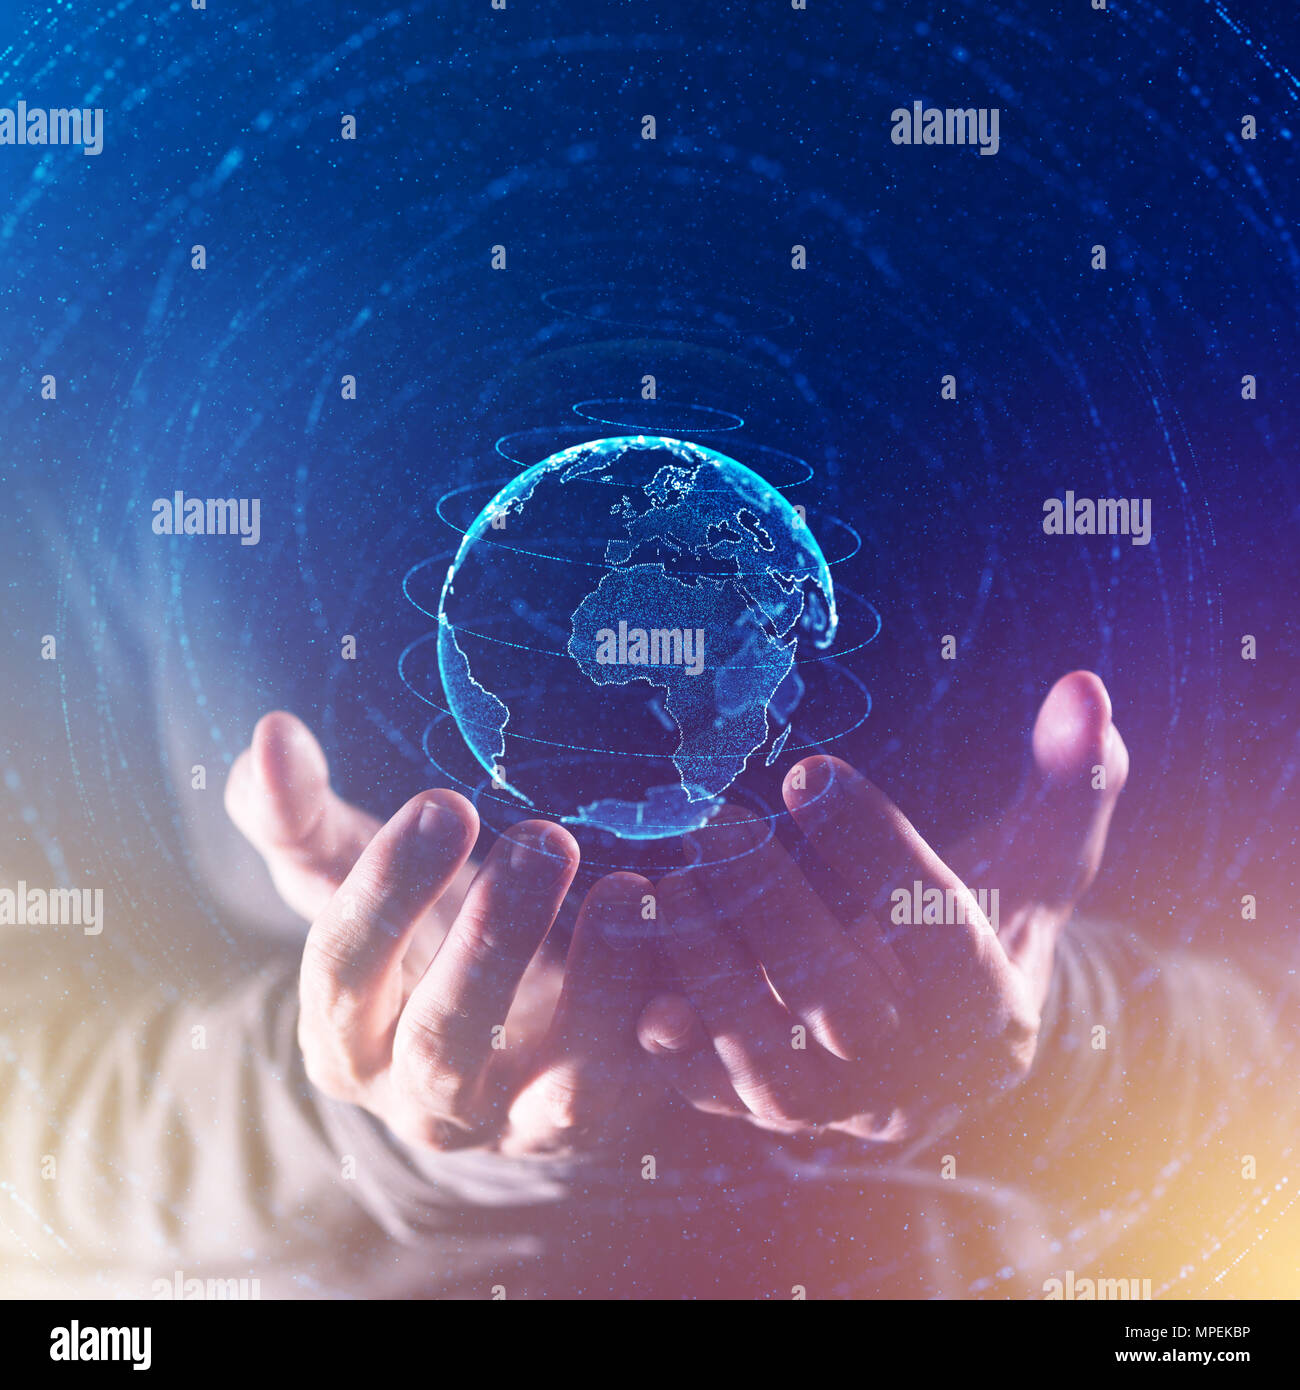 Global business and communication concept, connected world in hands of business person, abstract illustration mixed media Stock Photo